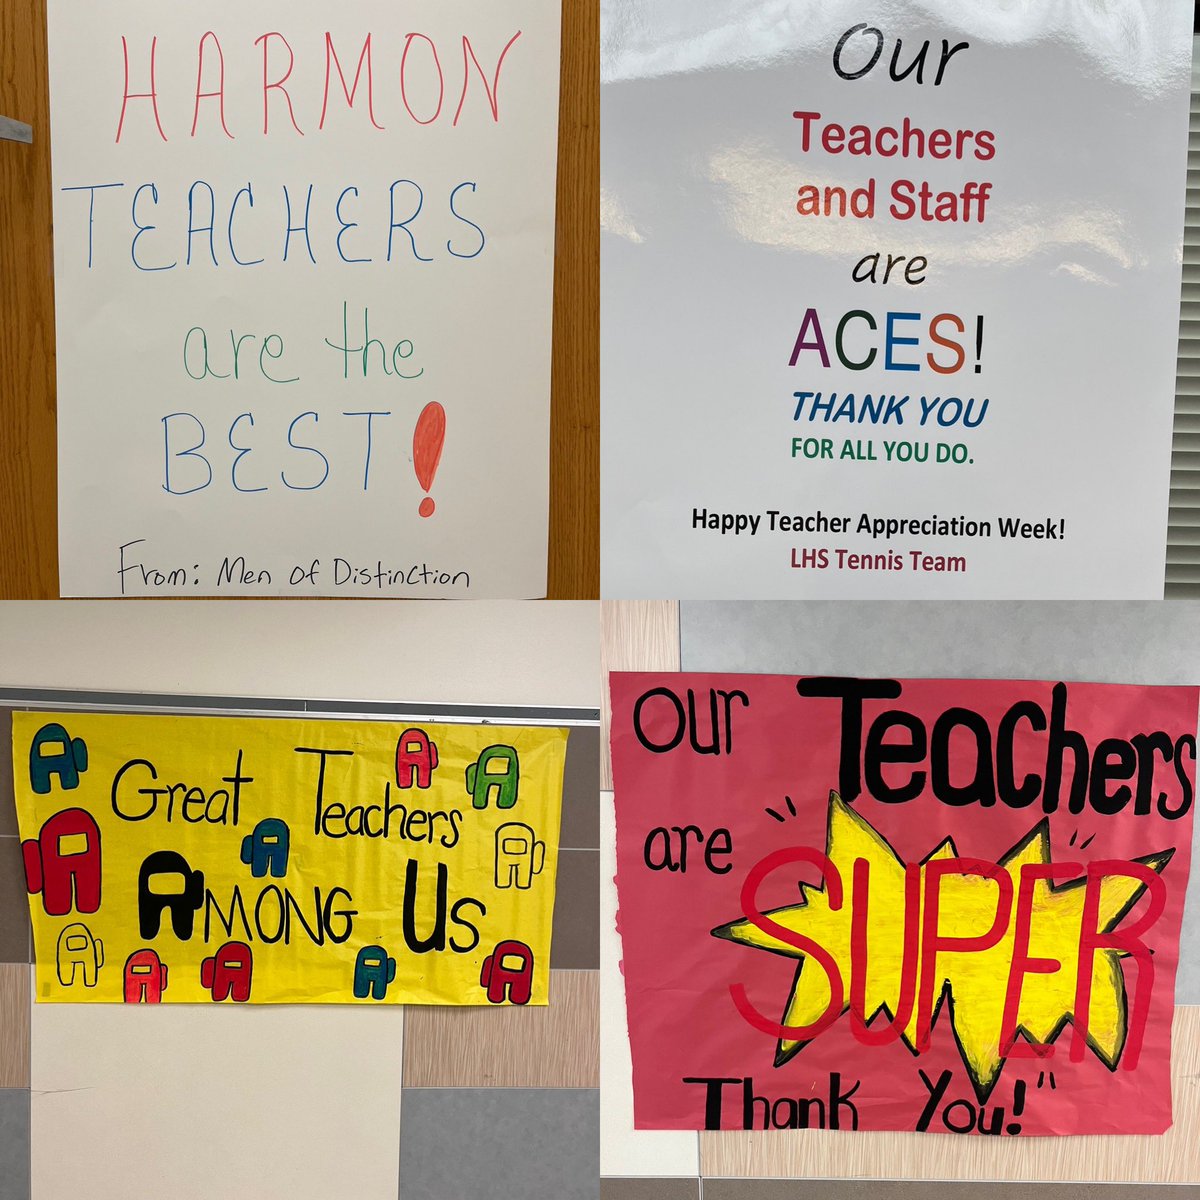 We’re kicking off #TeacherAppreciateWeek right with snacks all day and some signage around campus that expresses our gratitude for the important work our teachers do each and every day! #FarmerPride